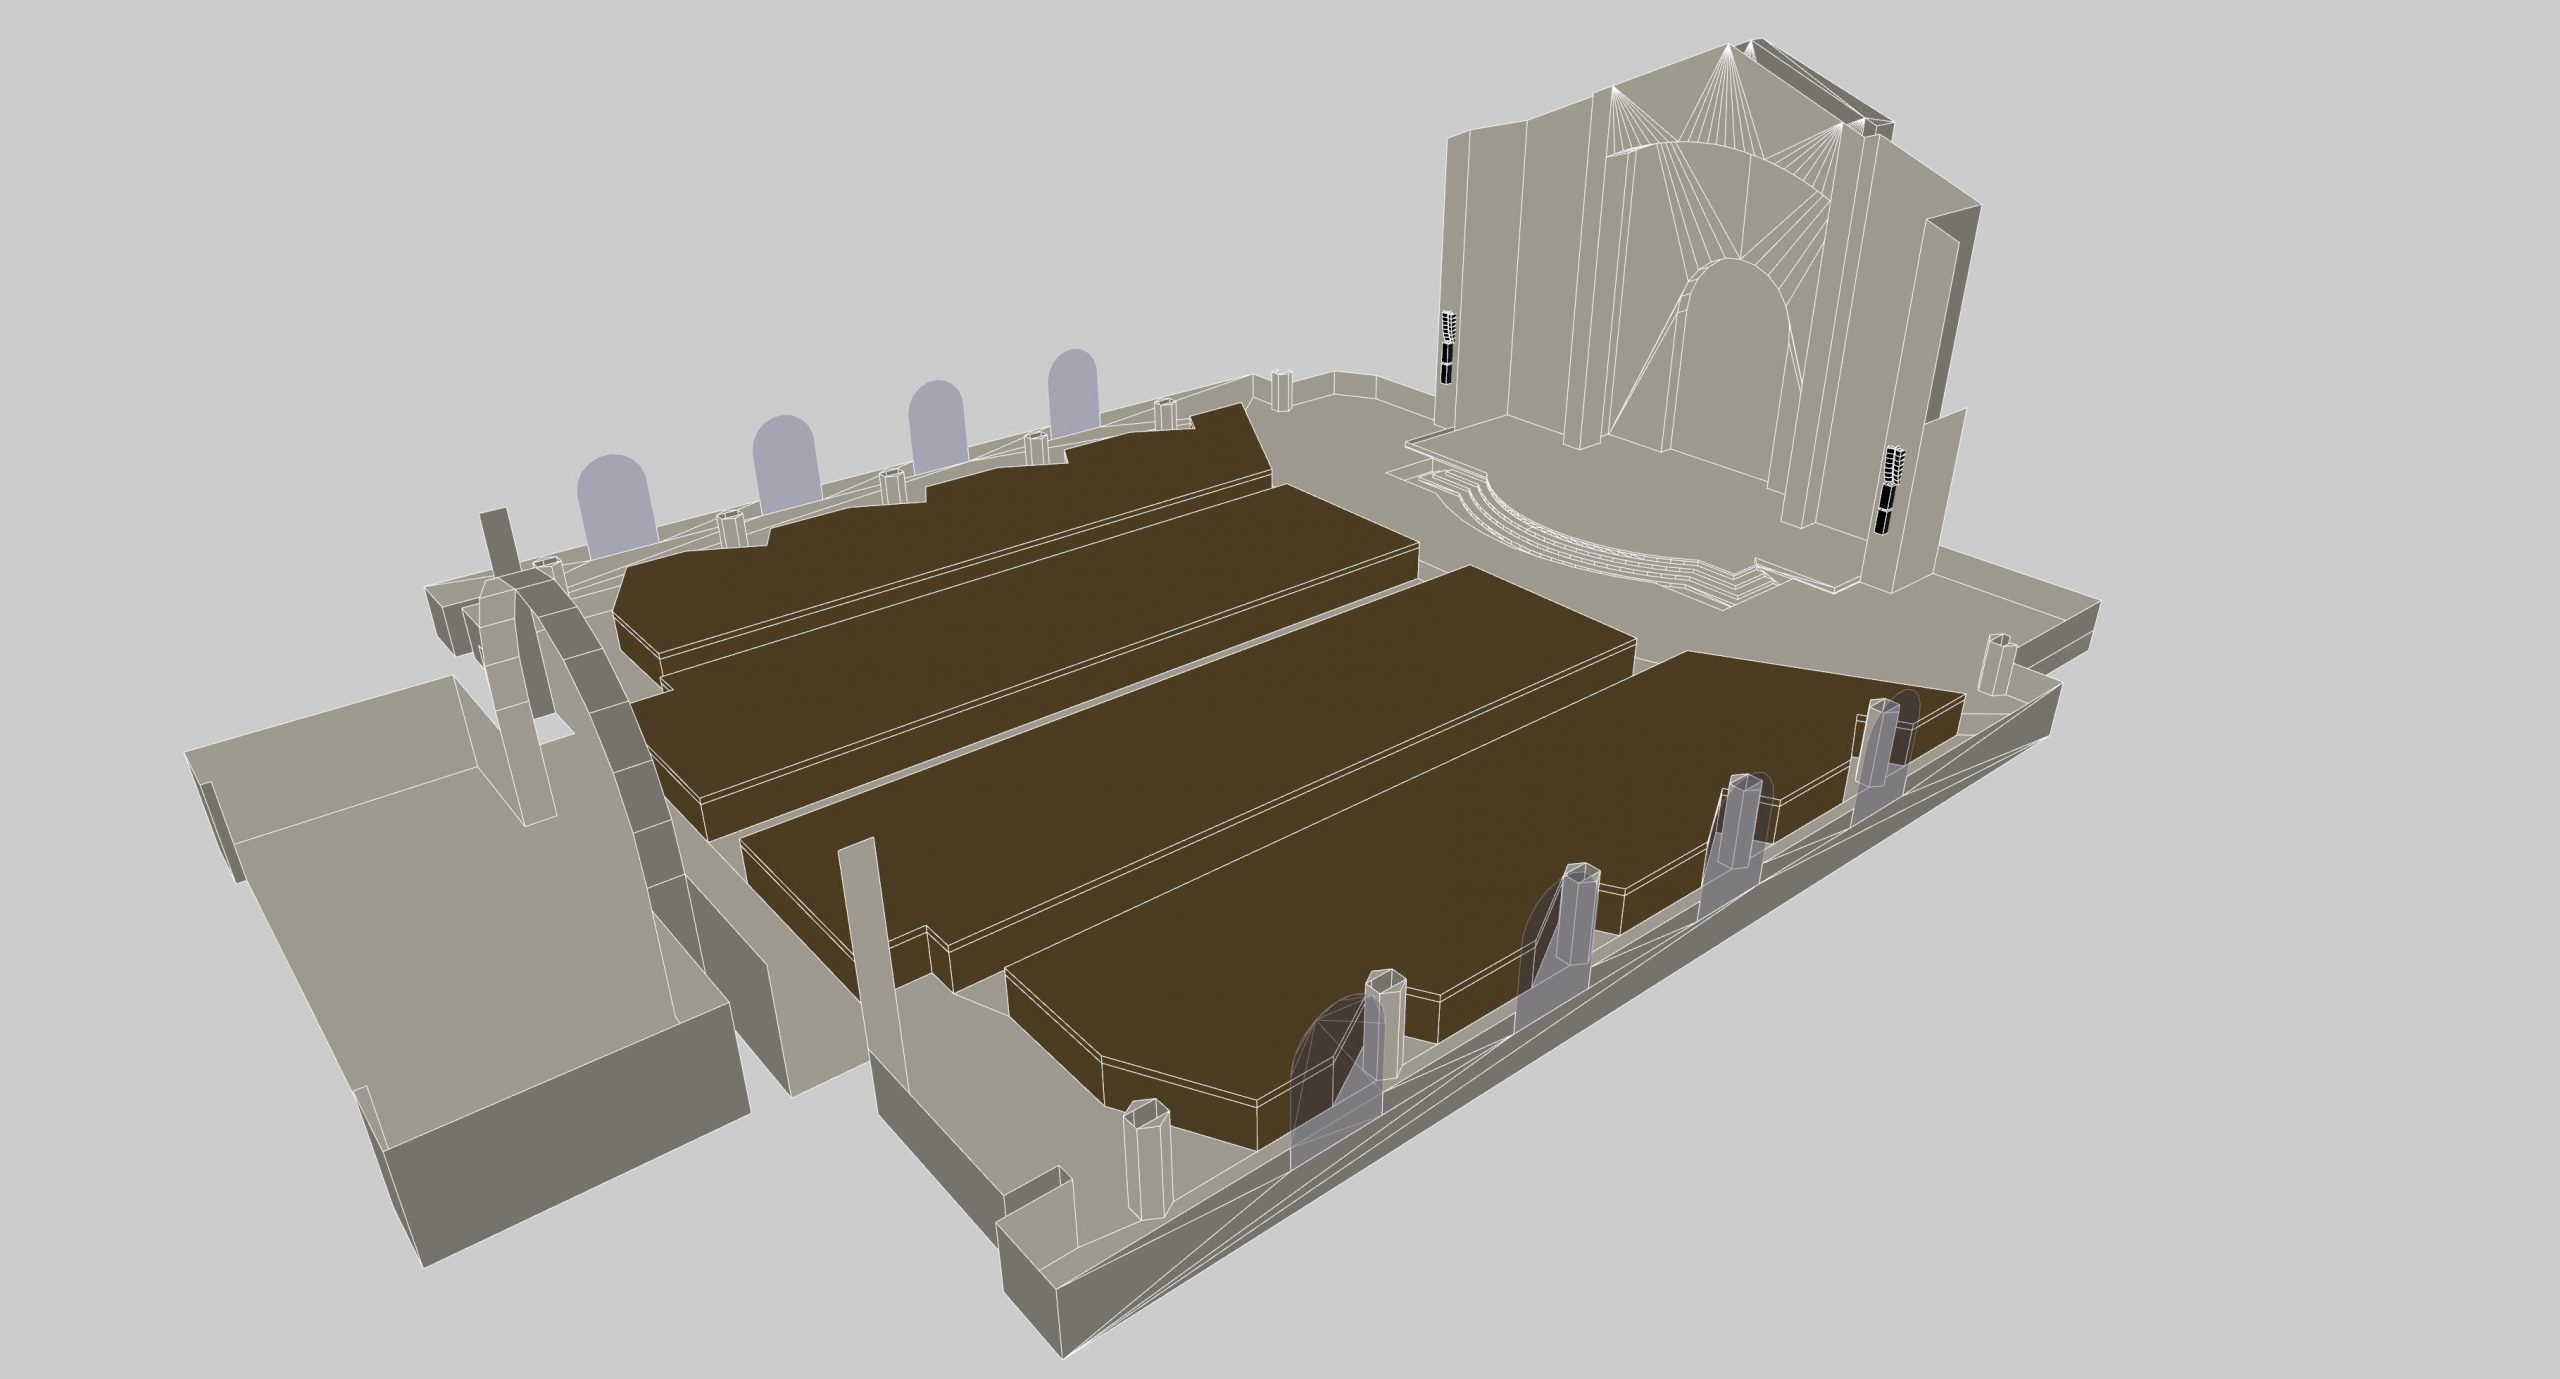 3D Model of sound system set up by L-Acoustics at St. Francis of Assisi